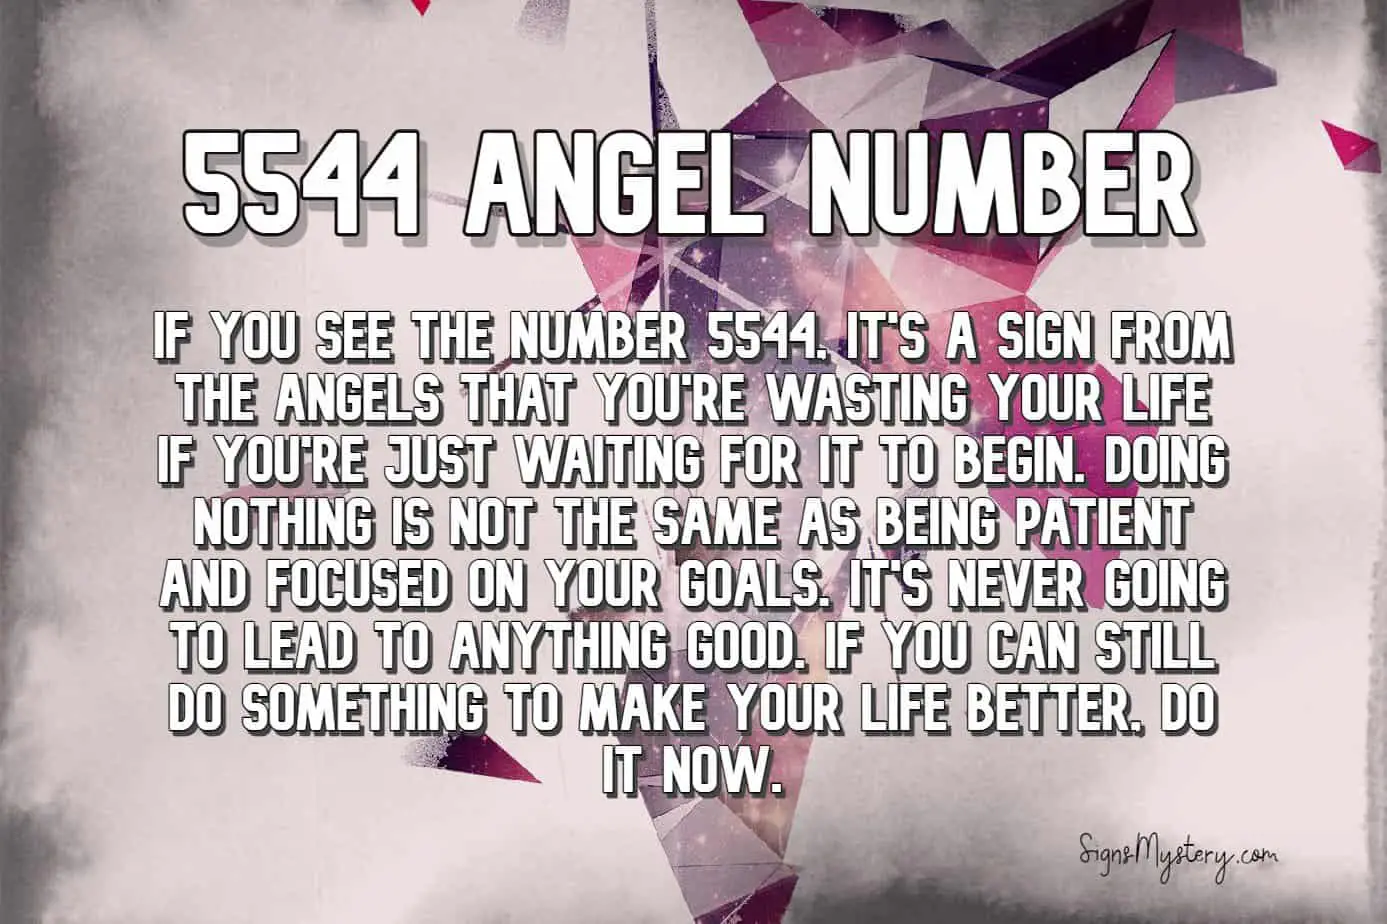 5544 angel number meaning